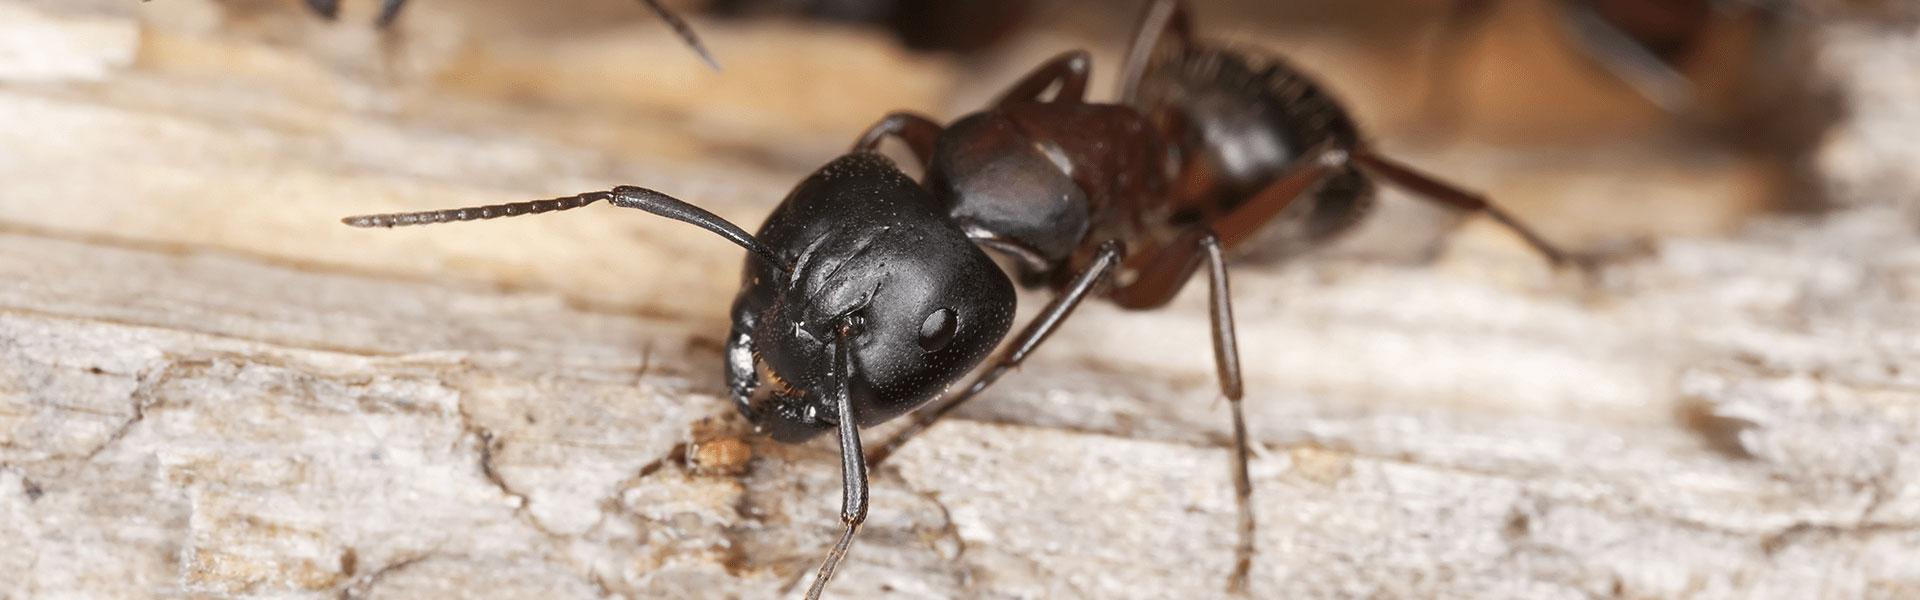 ant control for homes in Indiana, Kentucky, and Illinois